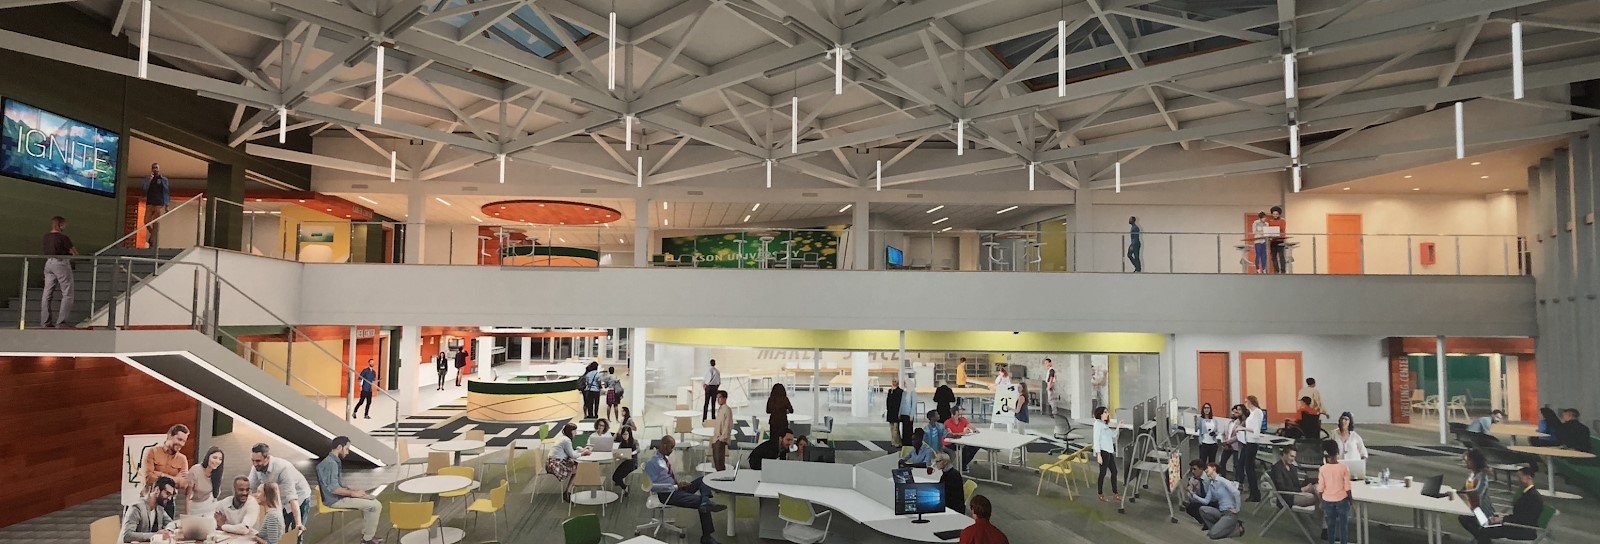 Artist rendering of the new renovations to be completed at Clarkson's Educational Resource Center